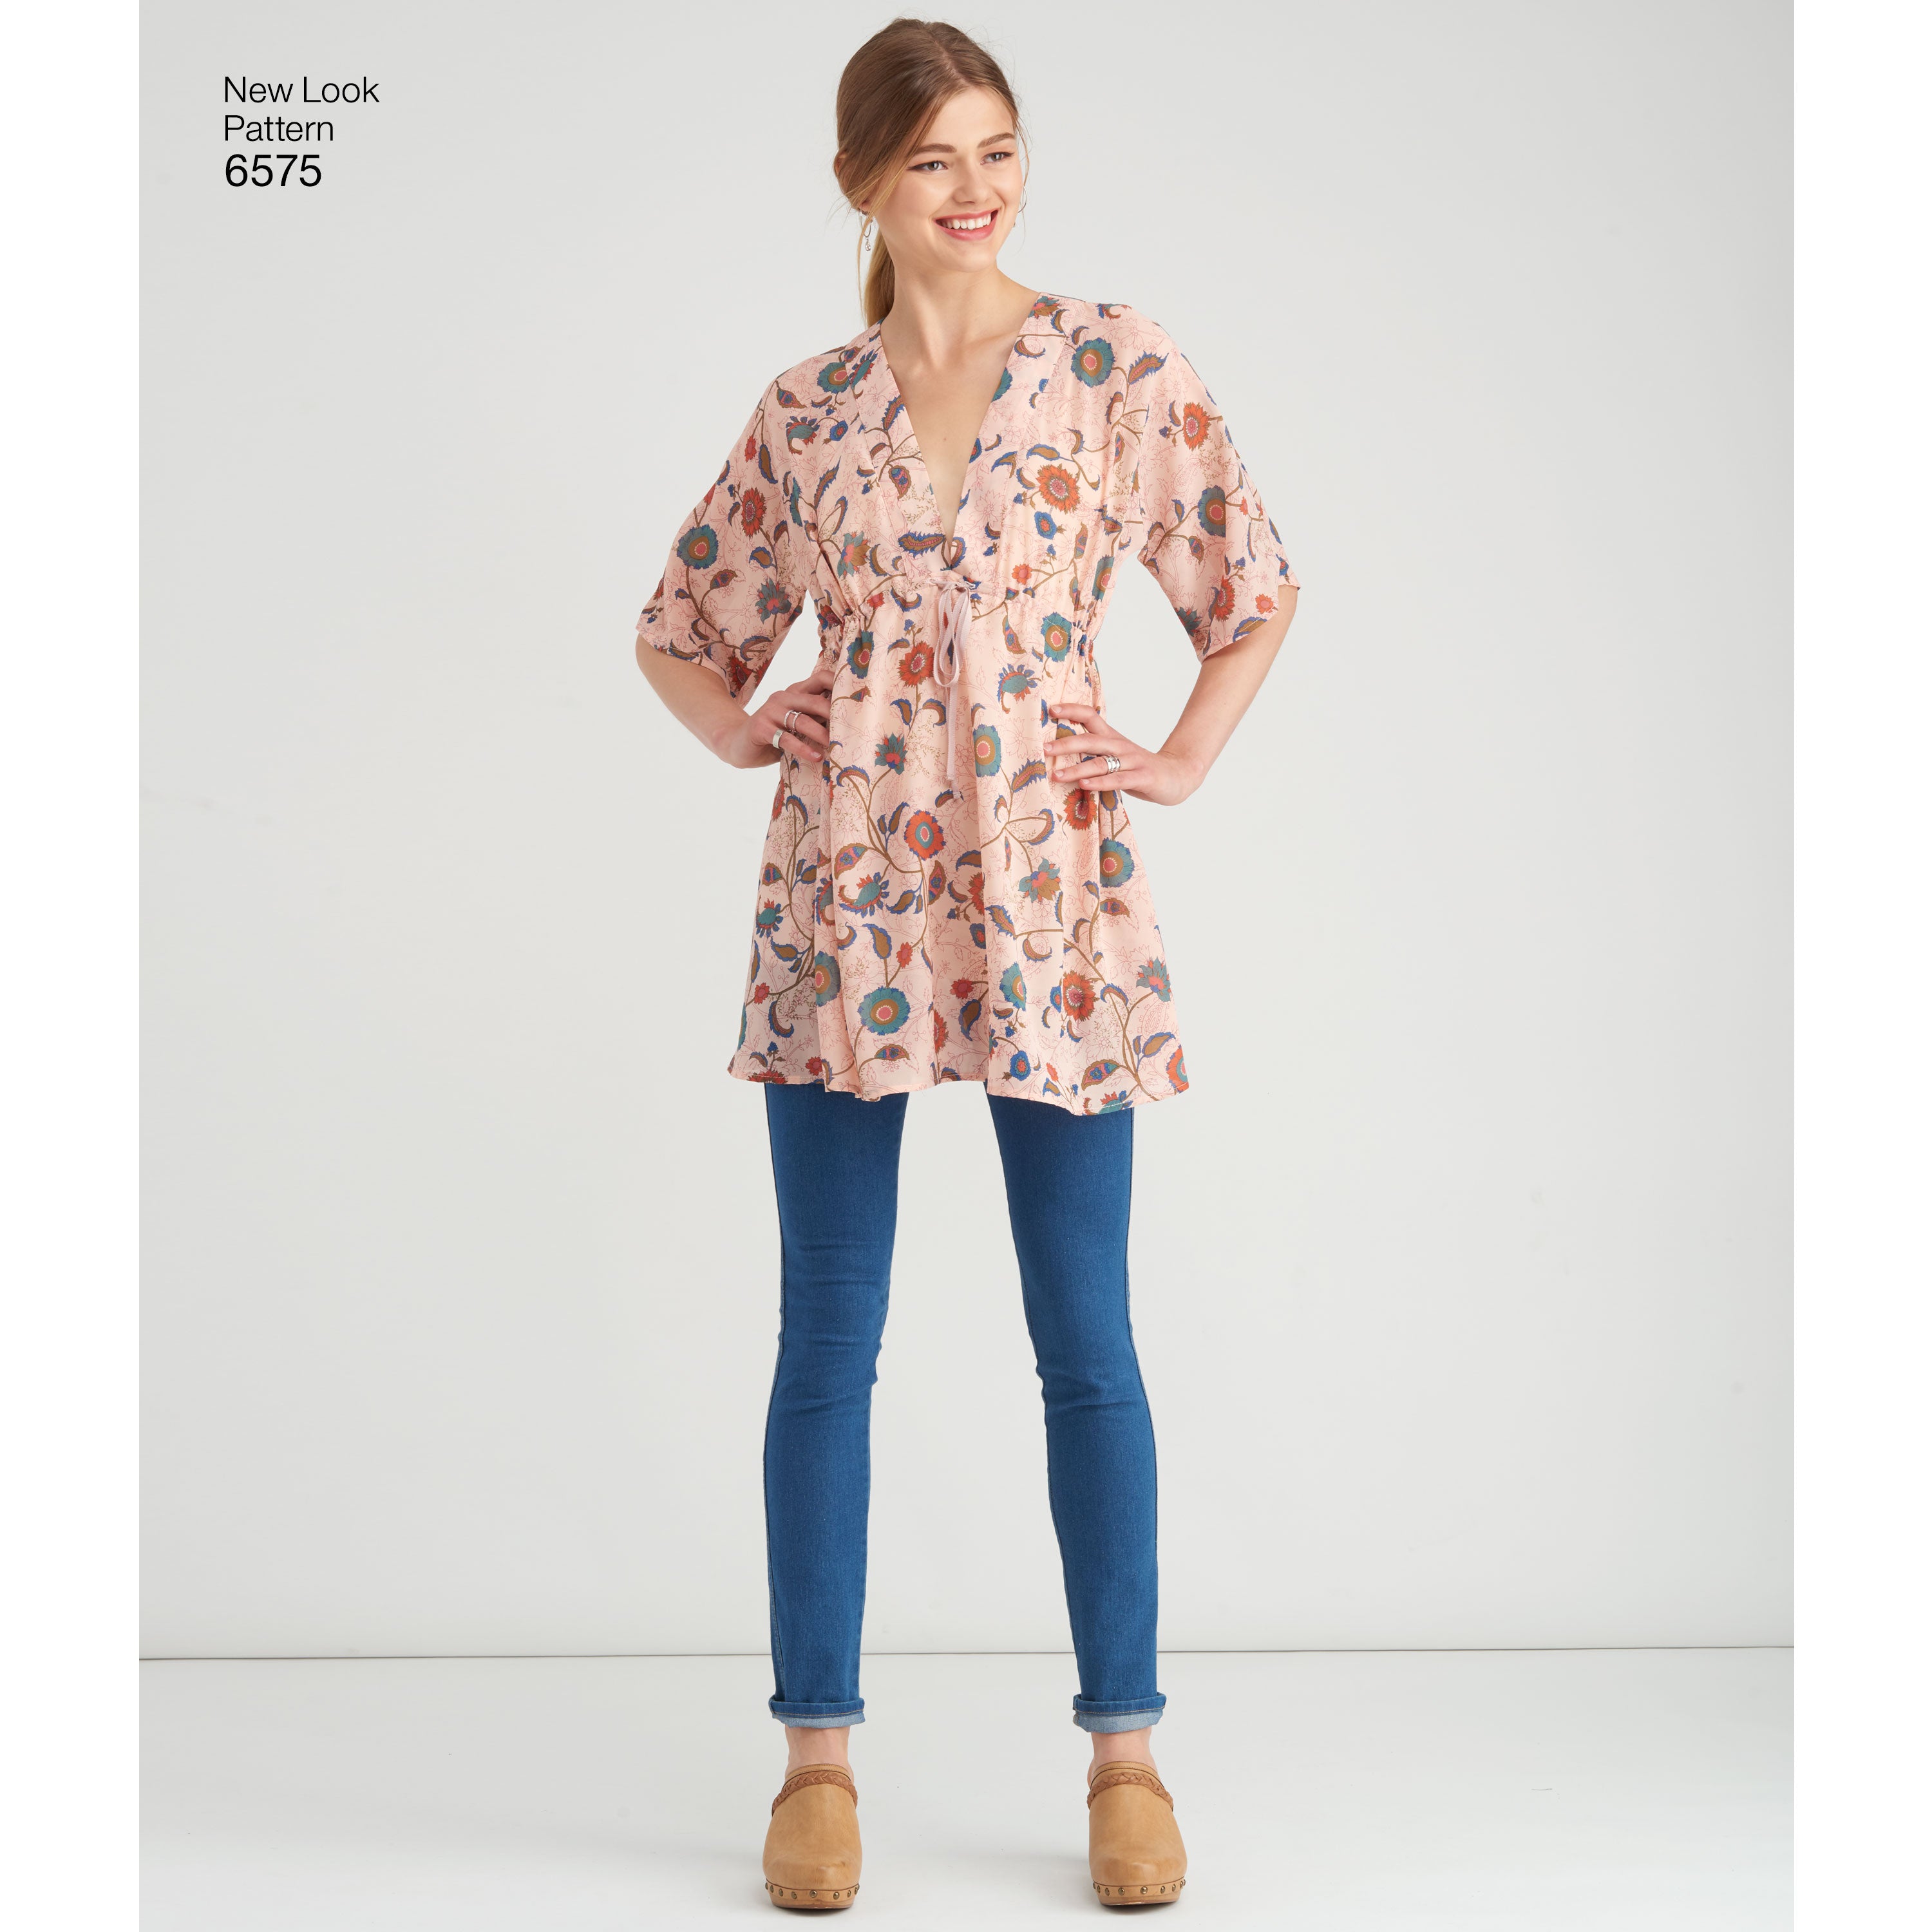 New Look Pattern N6603 Misses' Mini Dress, Tunic And Top, 52% OFF